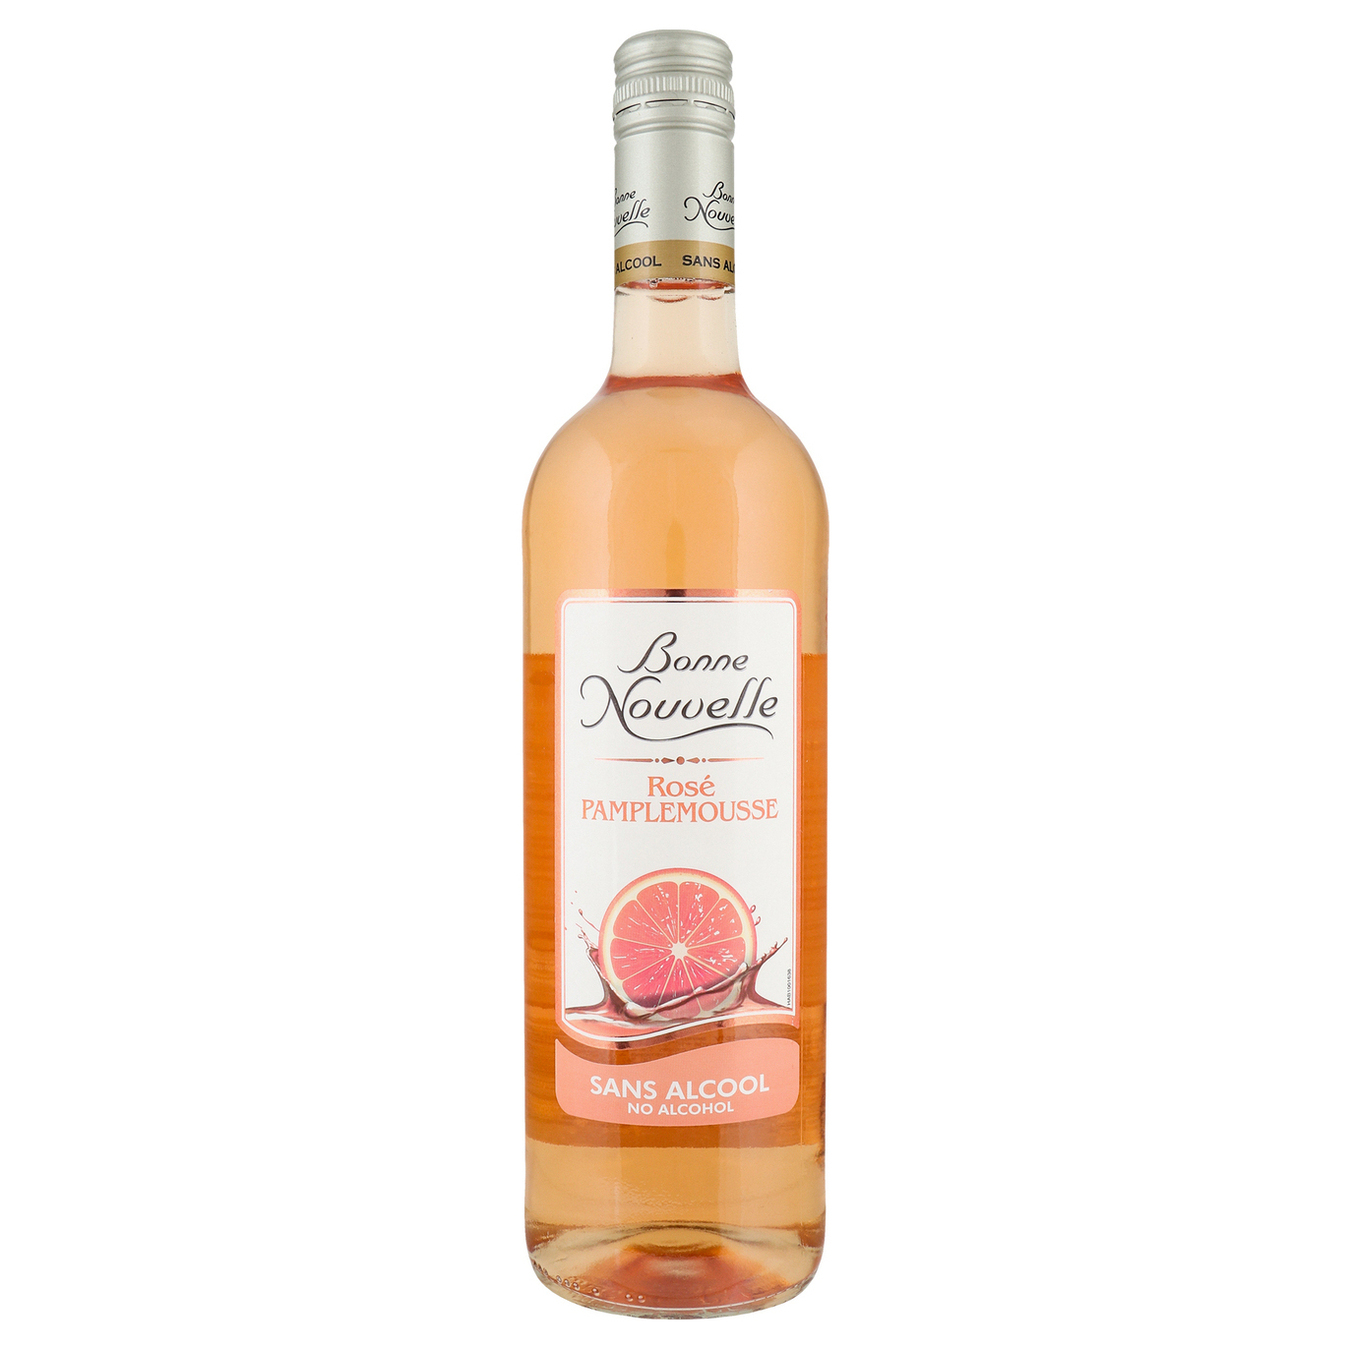 Non-Alcoholic Drink based on wine Bonne Nouvelle Pink Semi-Sweet with Grapefruit Aroma 0,75l